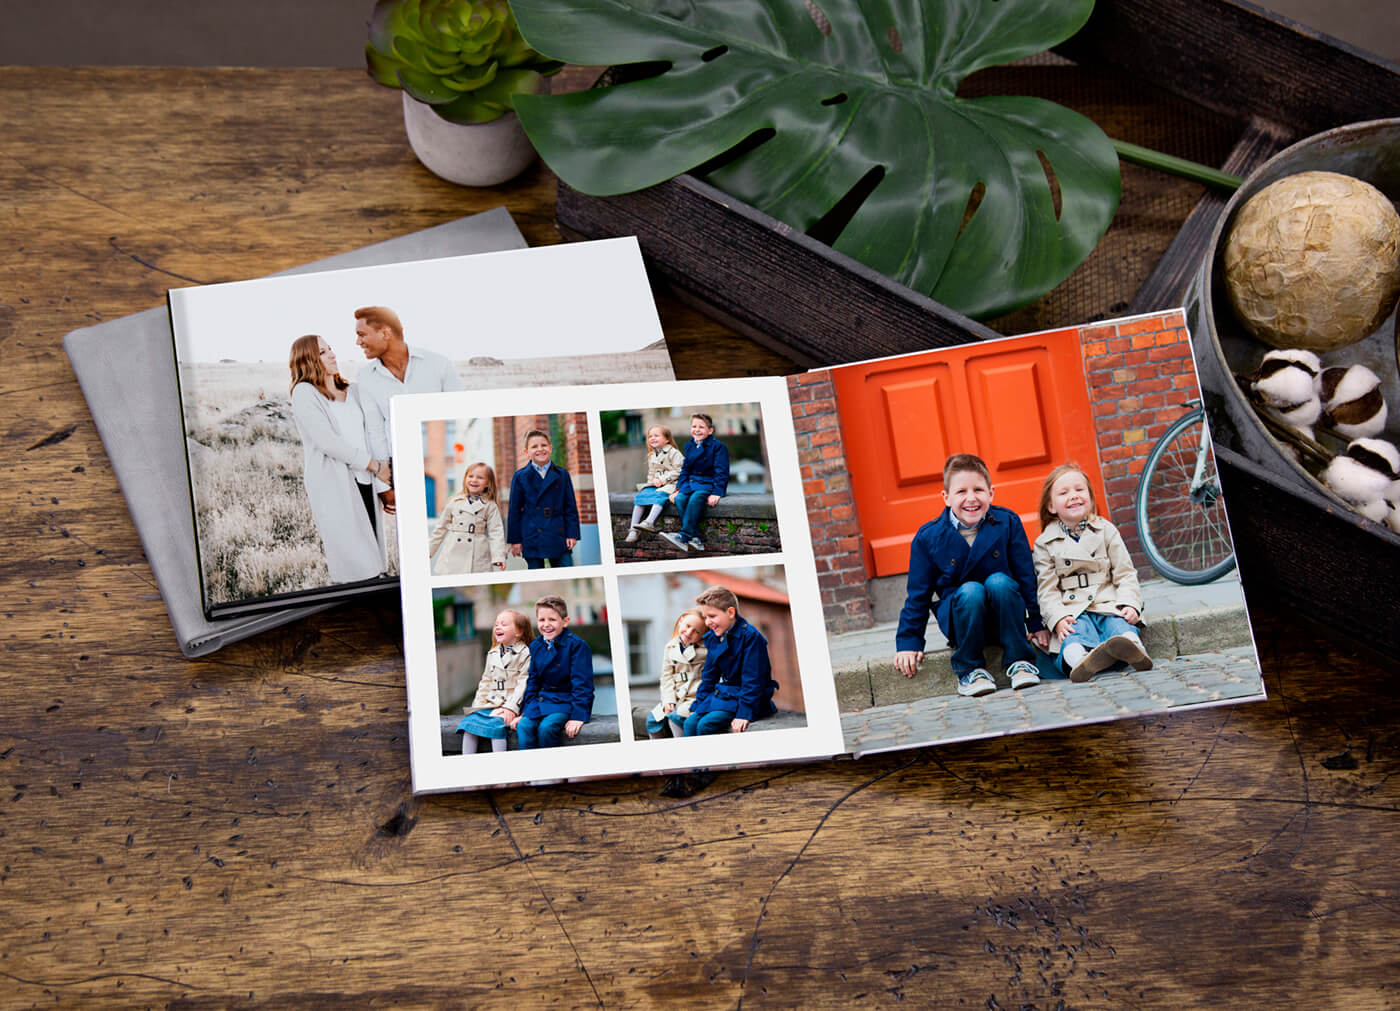 photo book by Pintique on coffee table showing a family